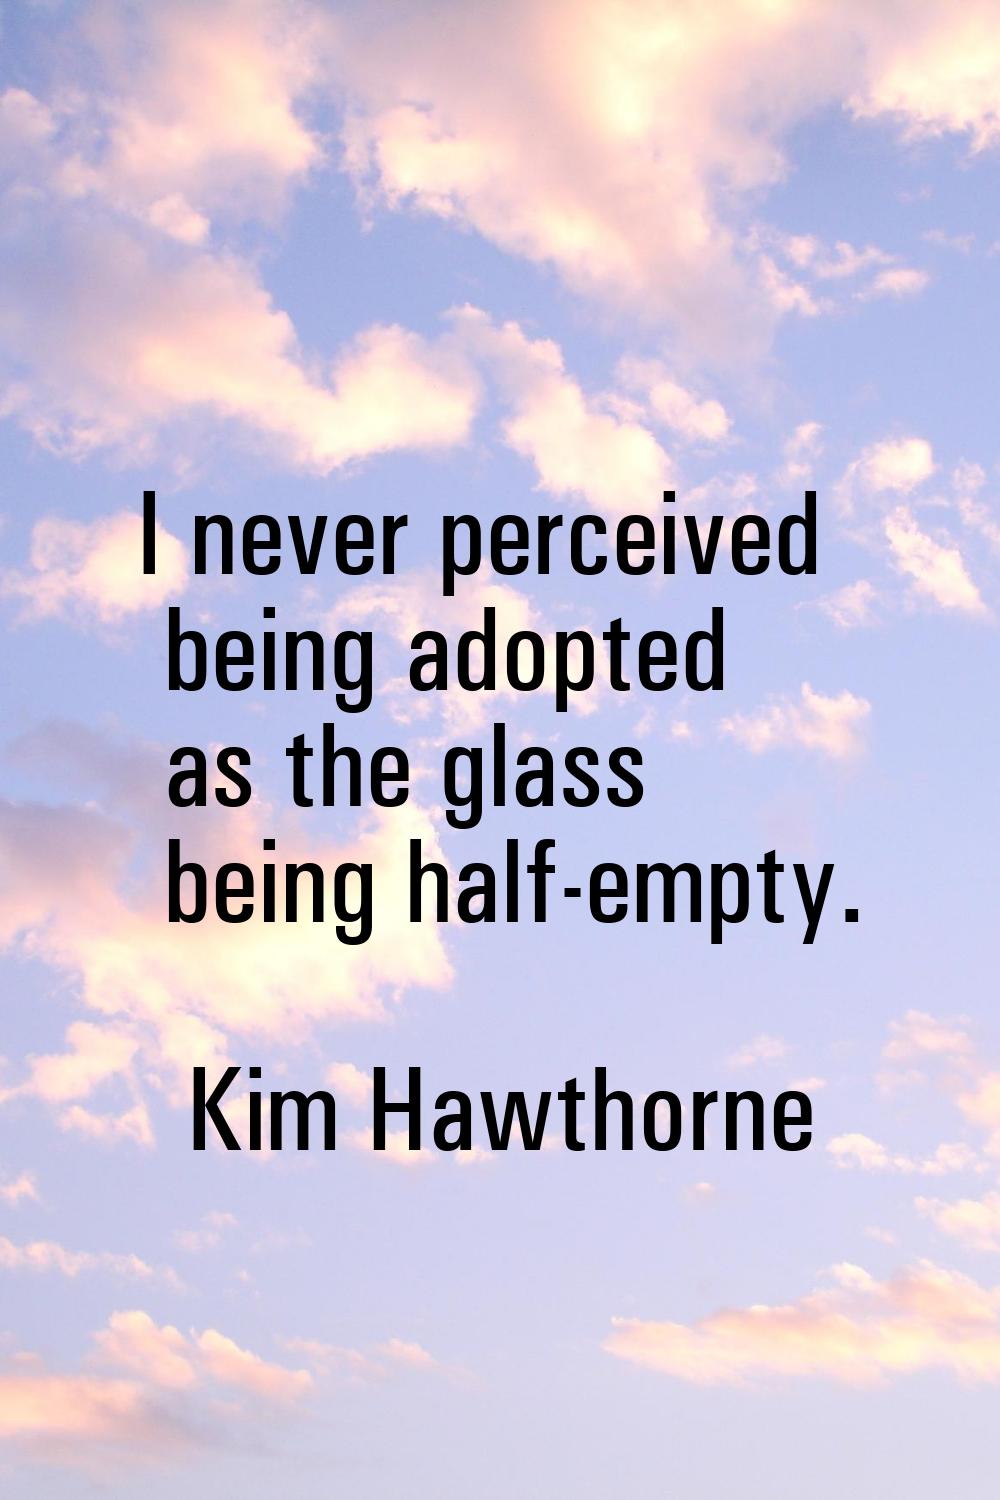 I never perceived being adopted as the glass being half-empty.